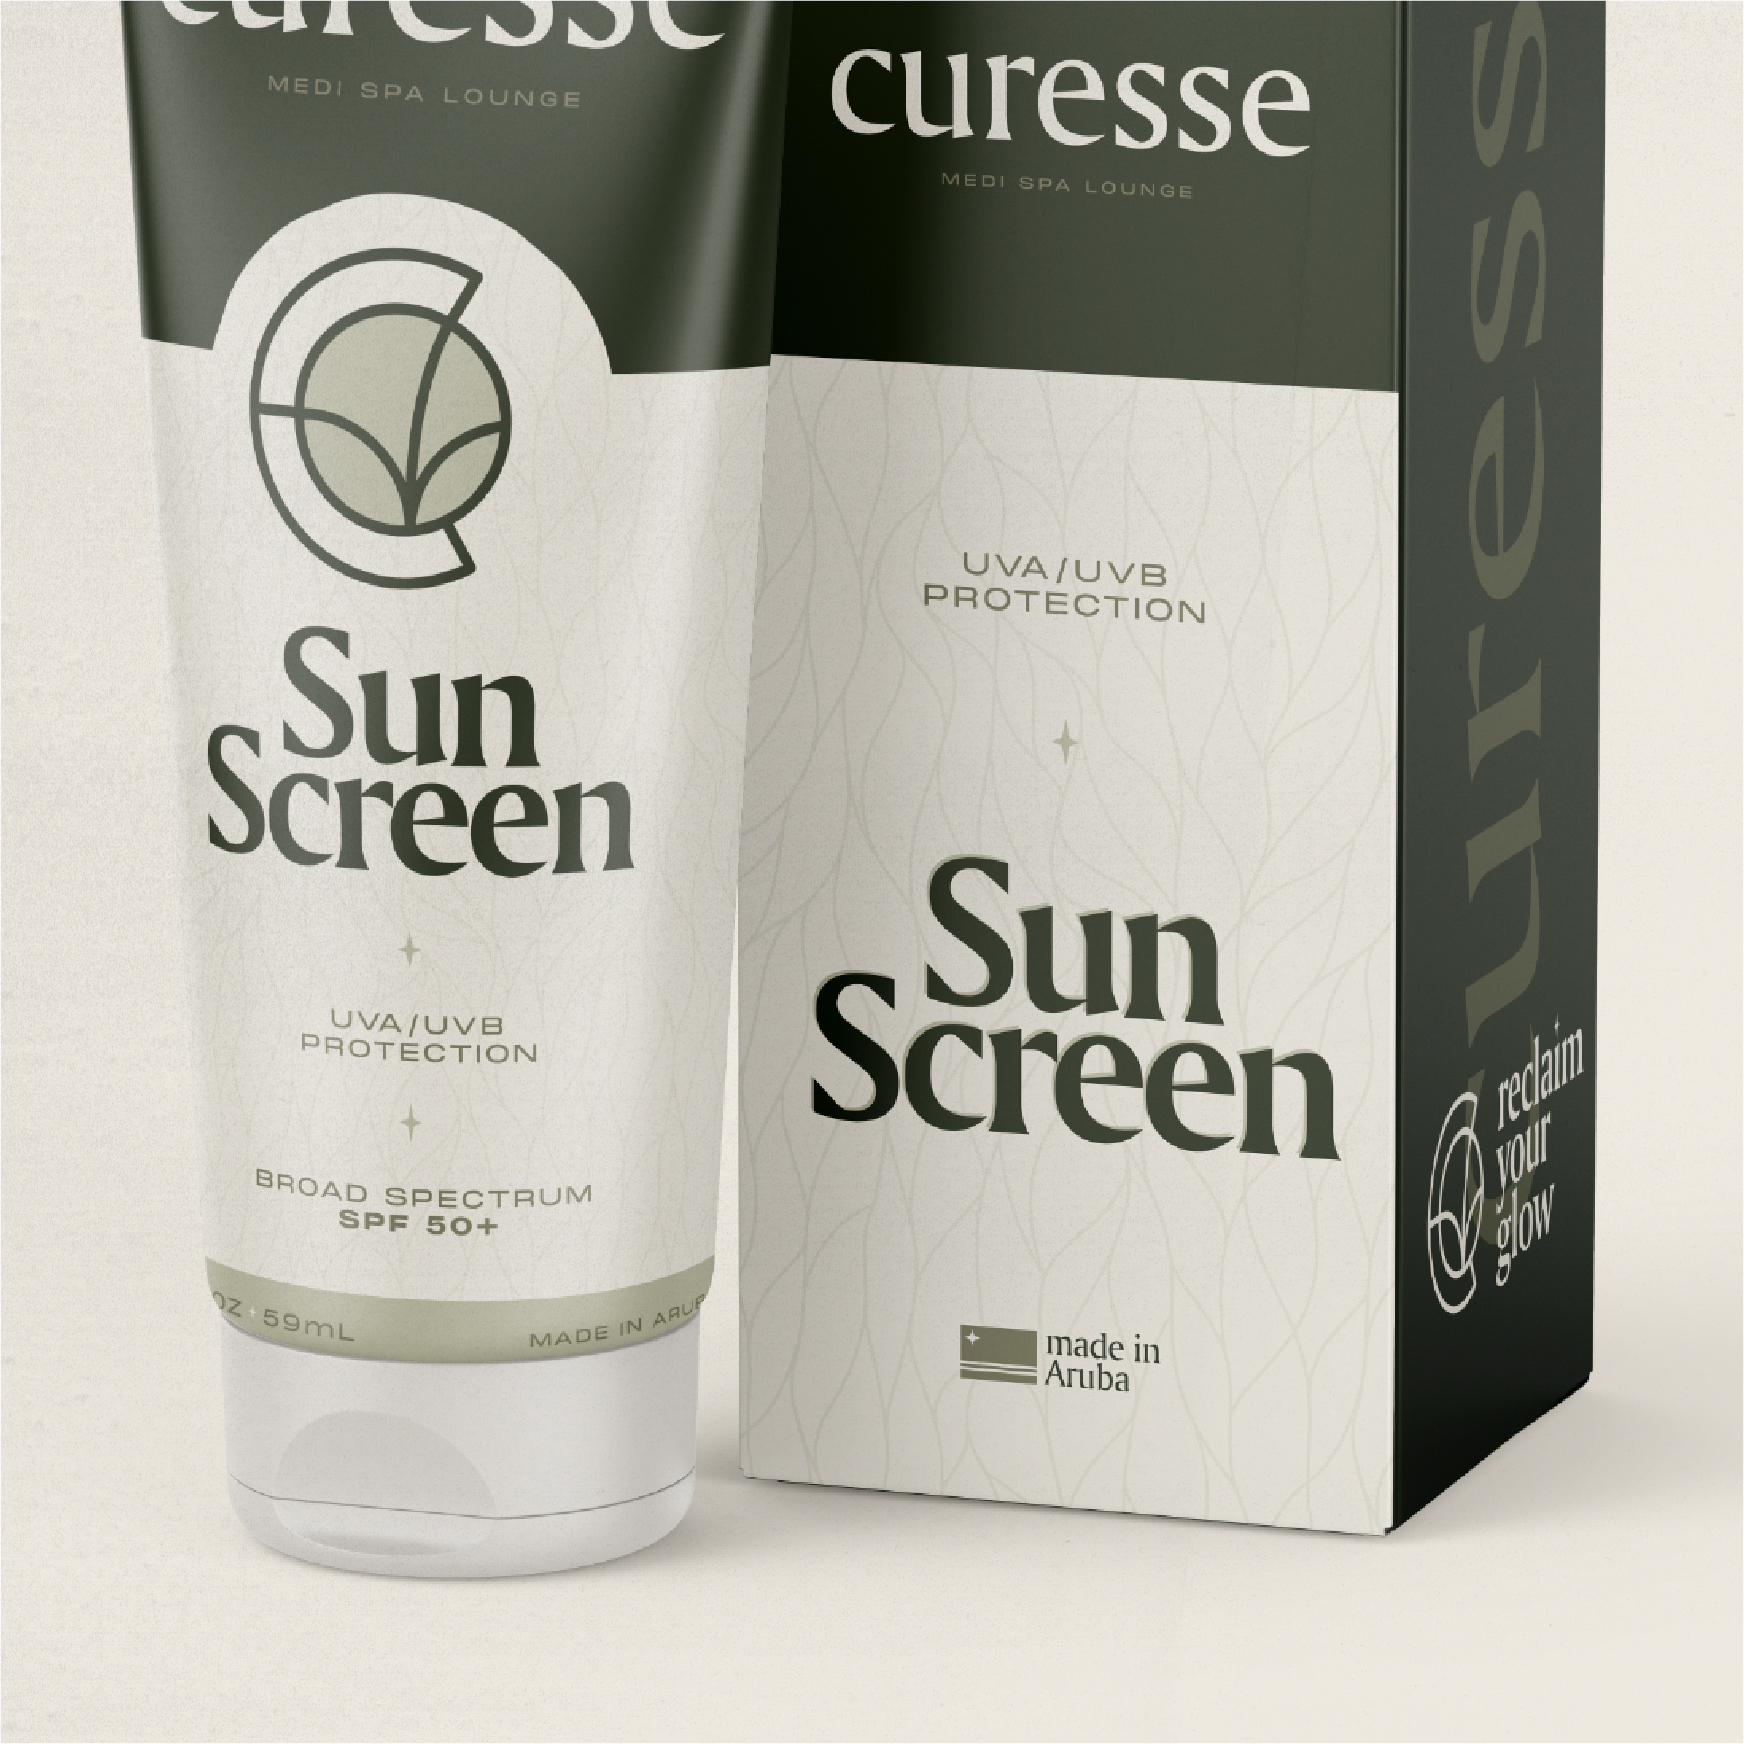 A bottle of sunscreen, blocking its packaging box, saying Made In Aruba with Aloe - UVA/UVB protection.